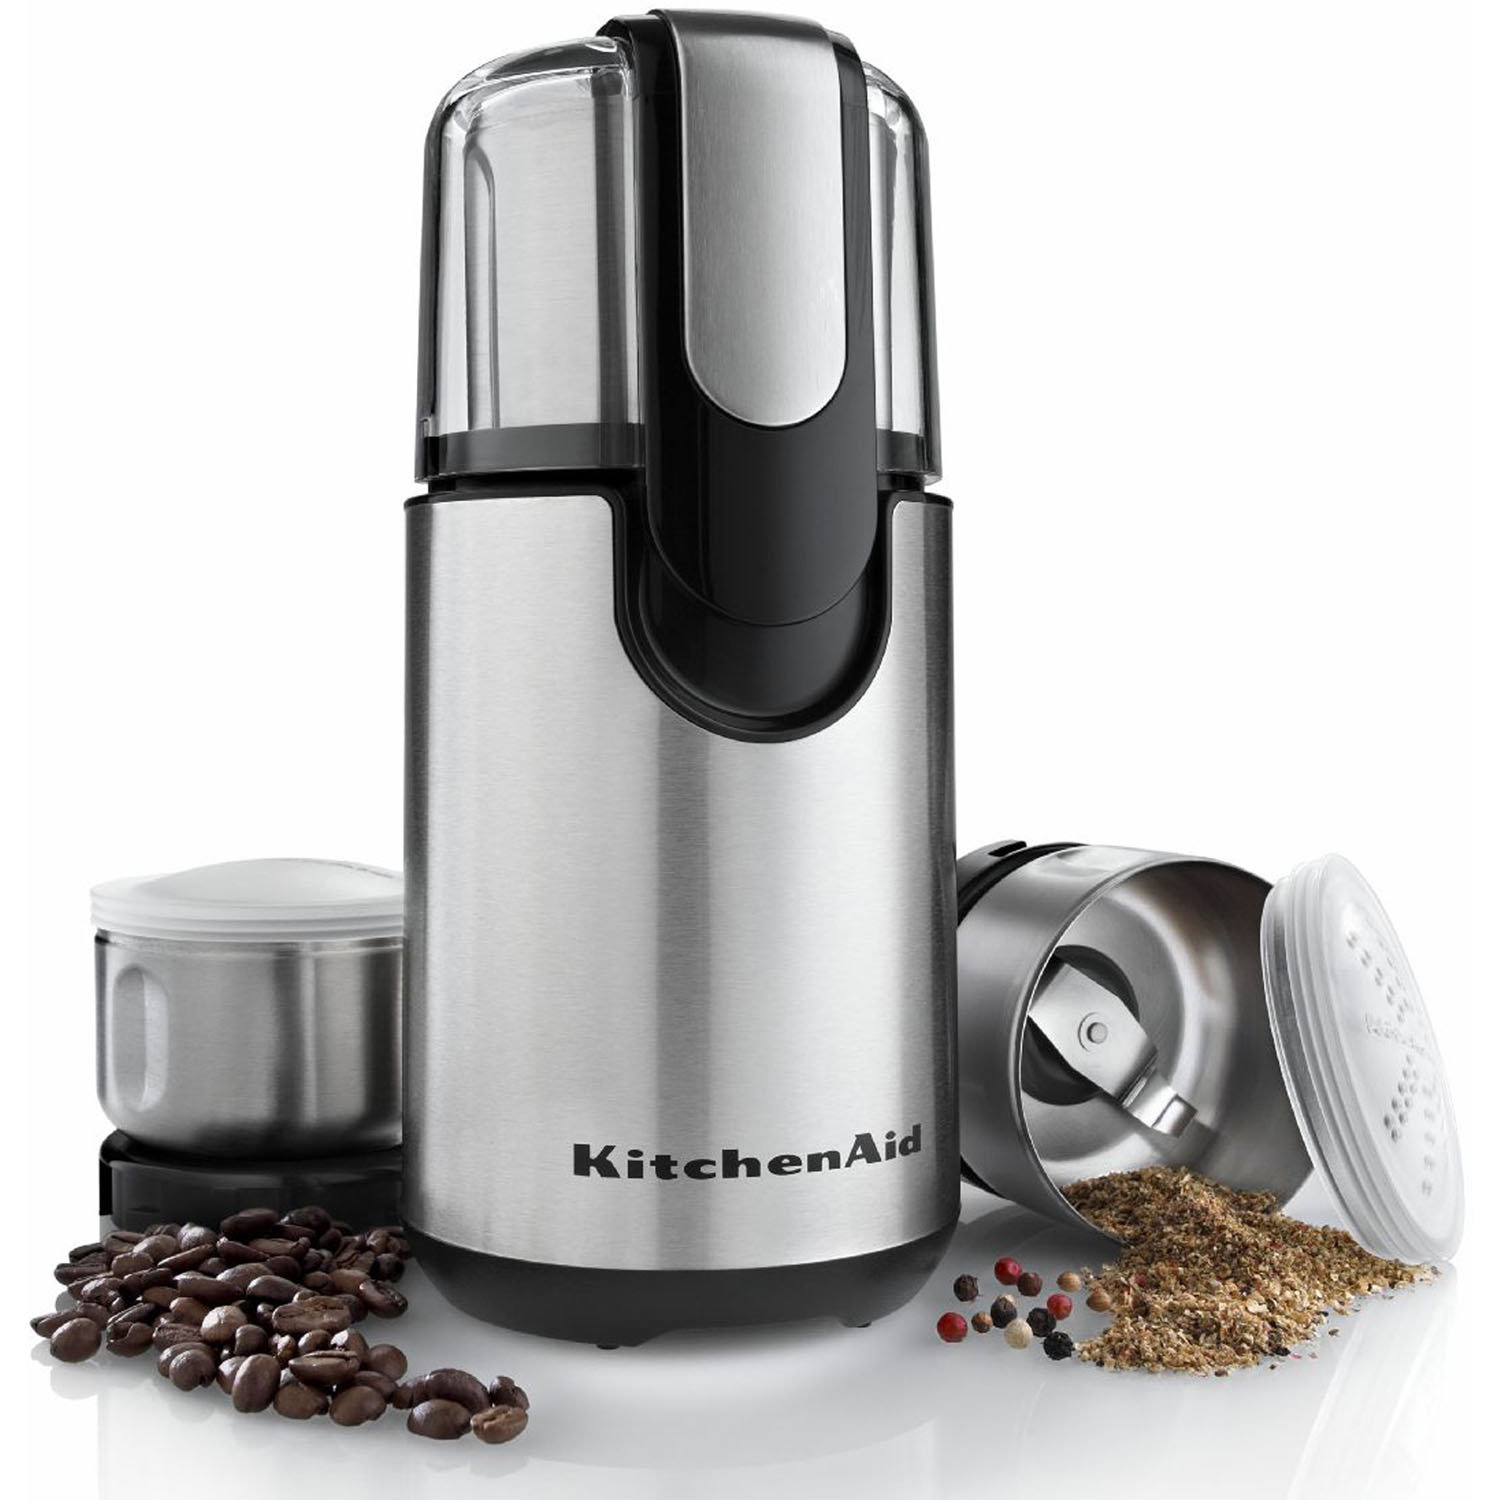  KitchenAid KCM4212SX Cold Brew Coffee Maker-Brushed Stainless  Steel, 28 ounce & Blade Coffee Grinder - Onyx Black : Home & Kitchen